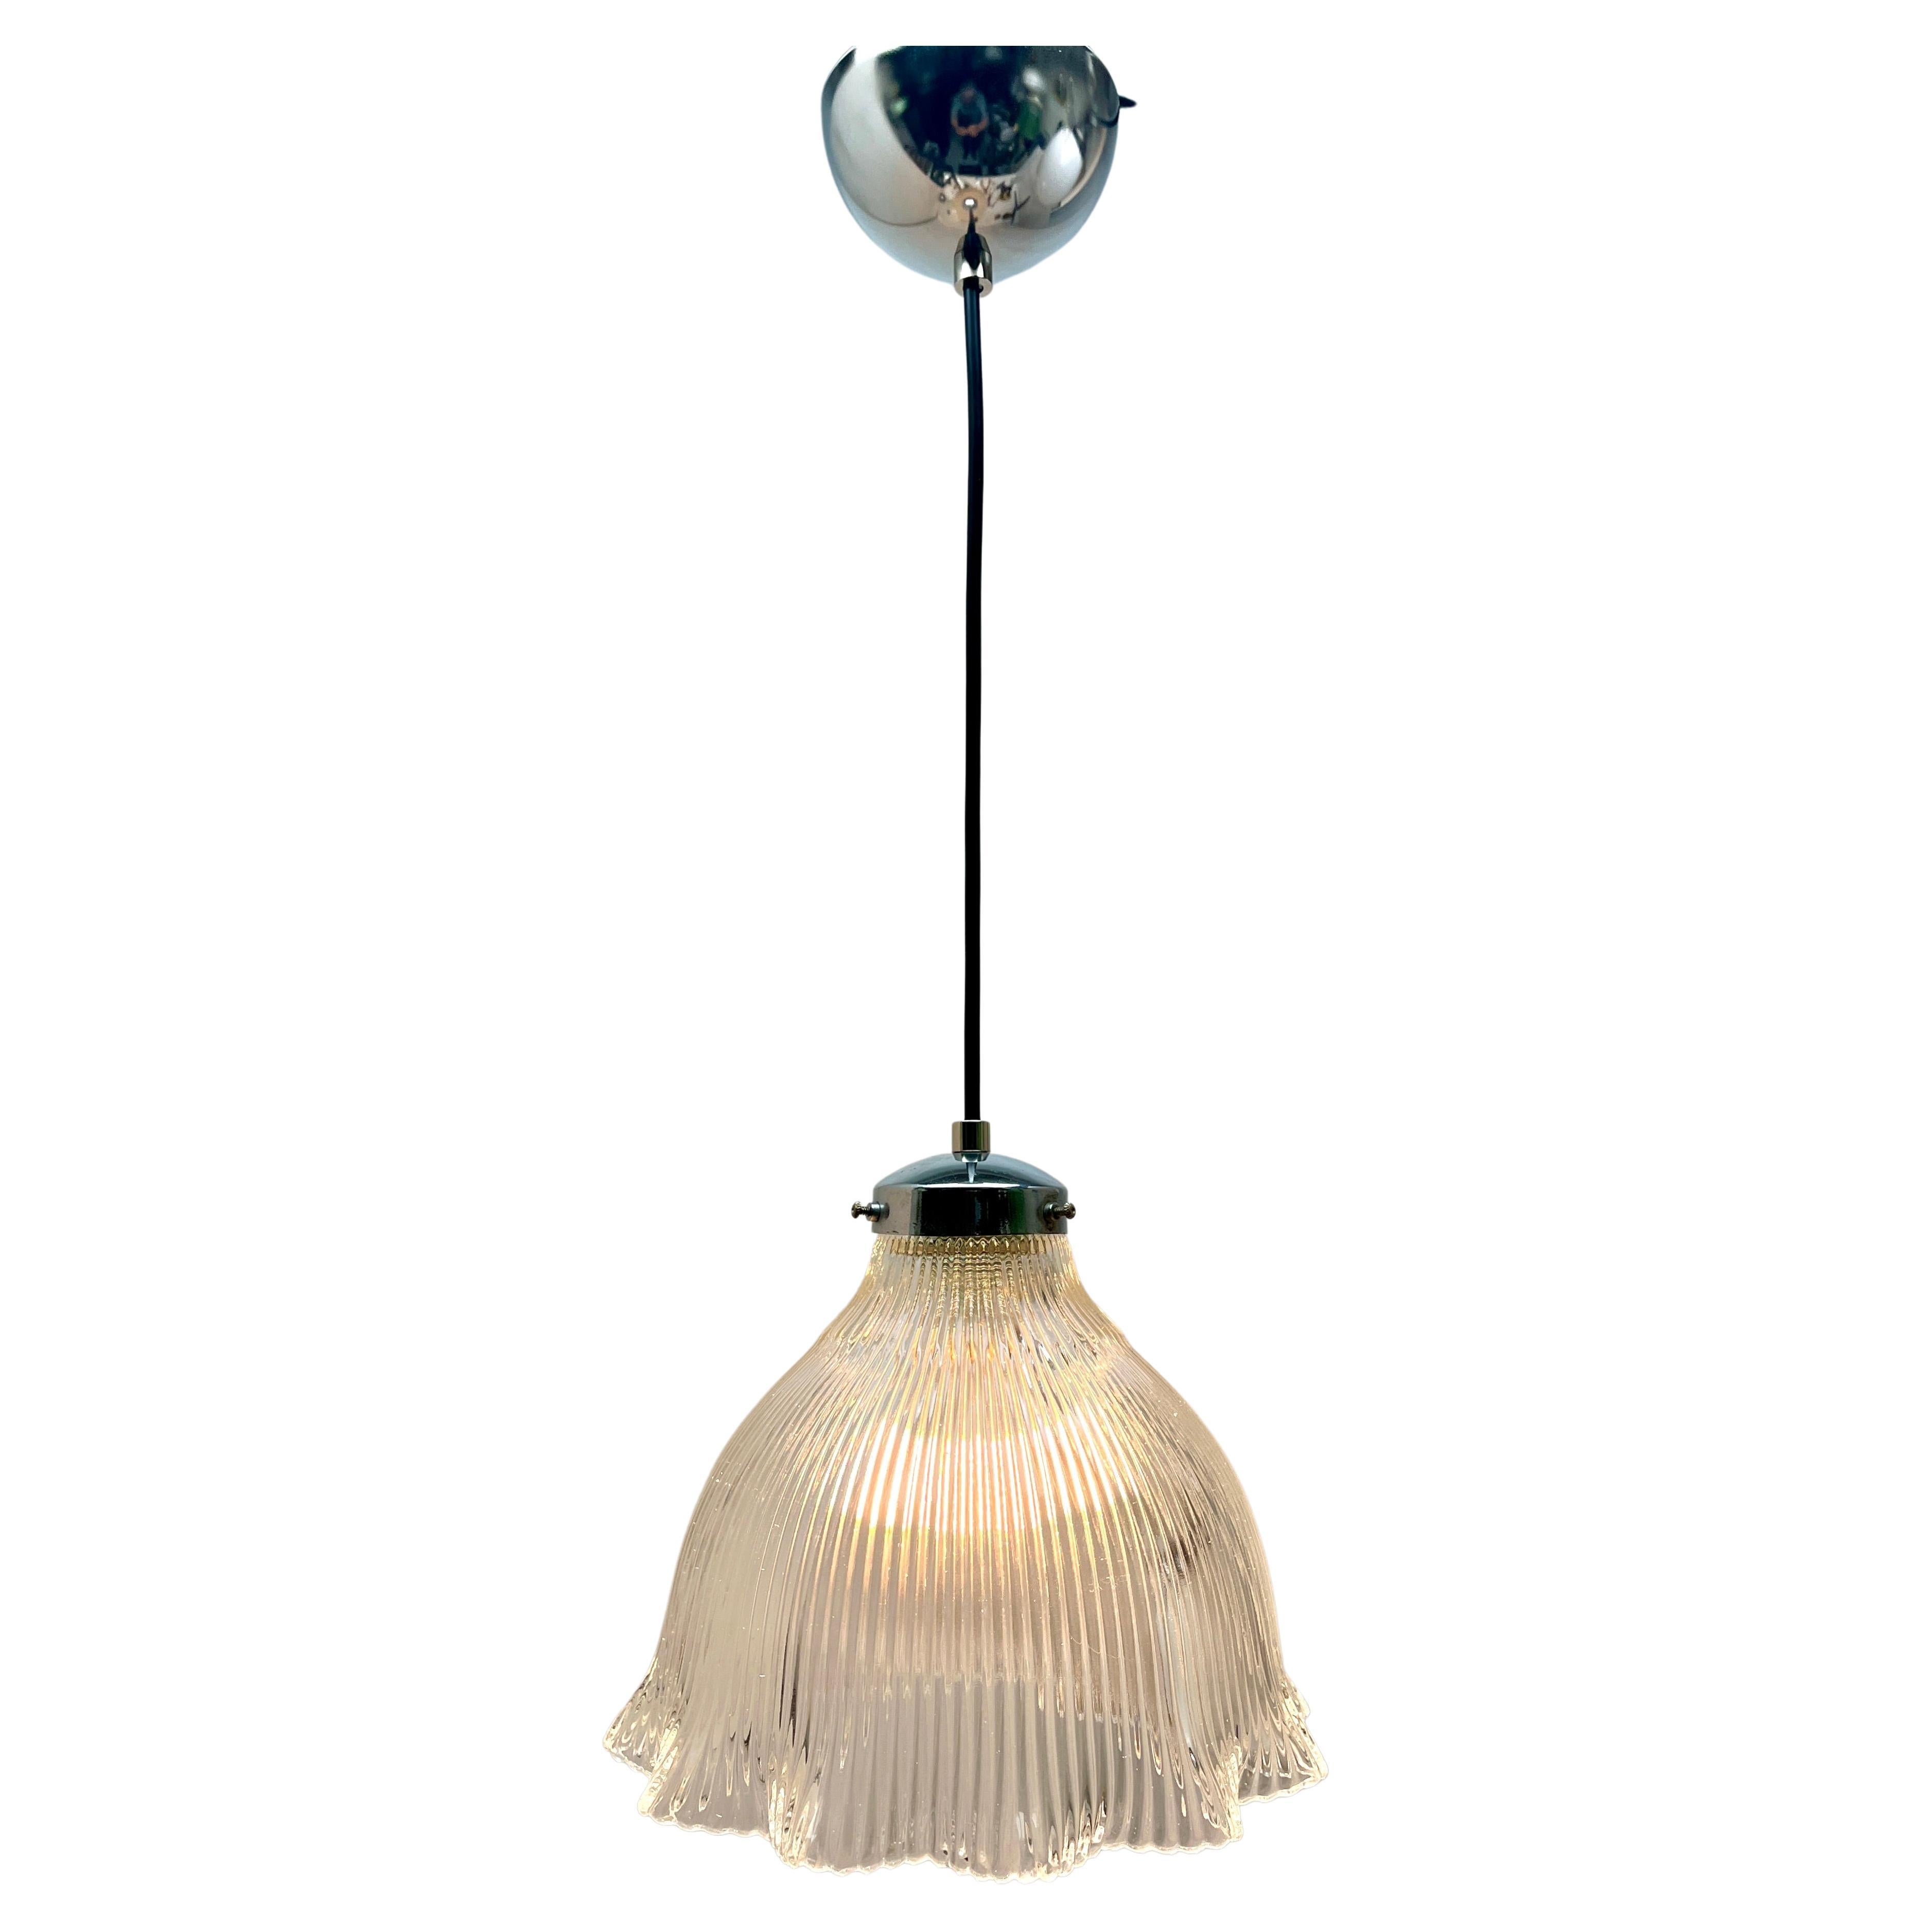 Pendant Lamp with a Corrugated Glass Shade, 1950s, Netherlands